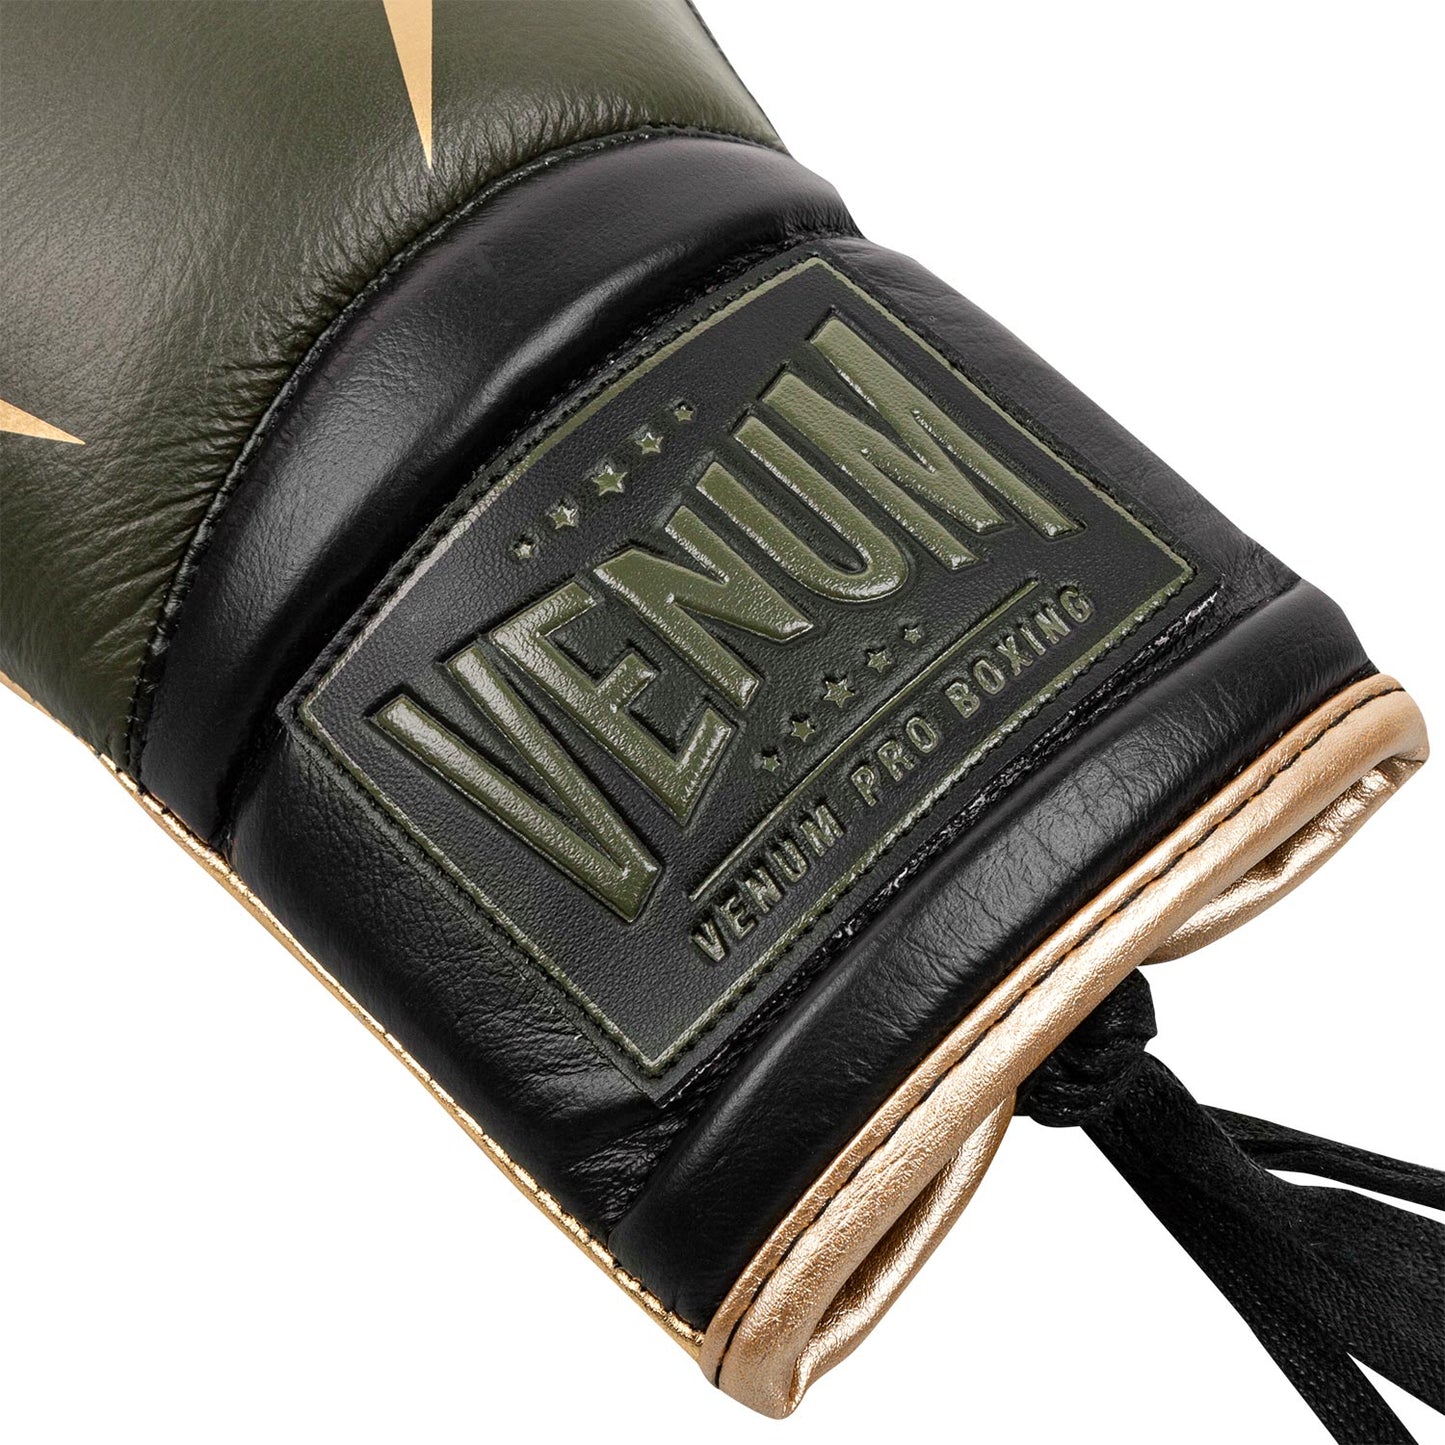 Venum Giant 2.0 Pro Boxing Gloves Linares Edition - With Laces - Khaki/Black/Gold